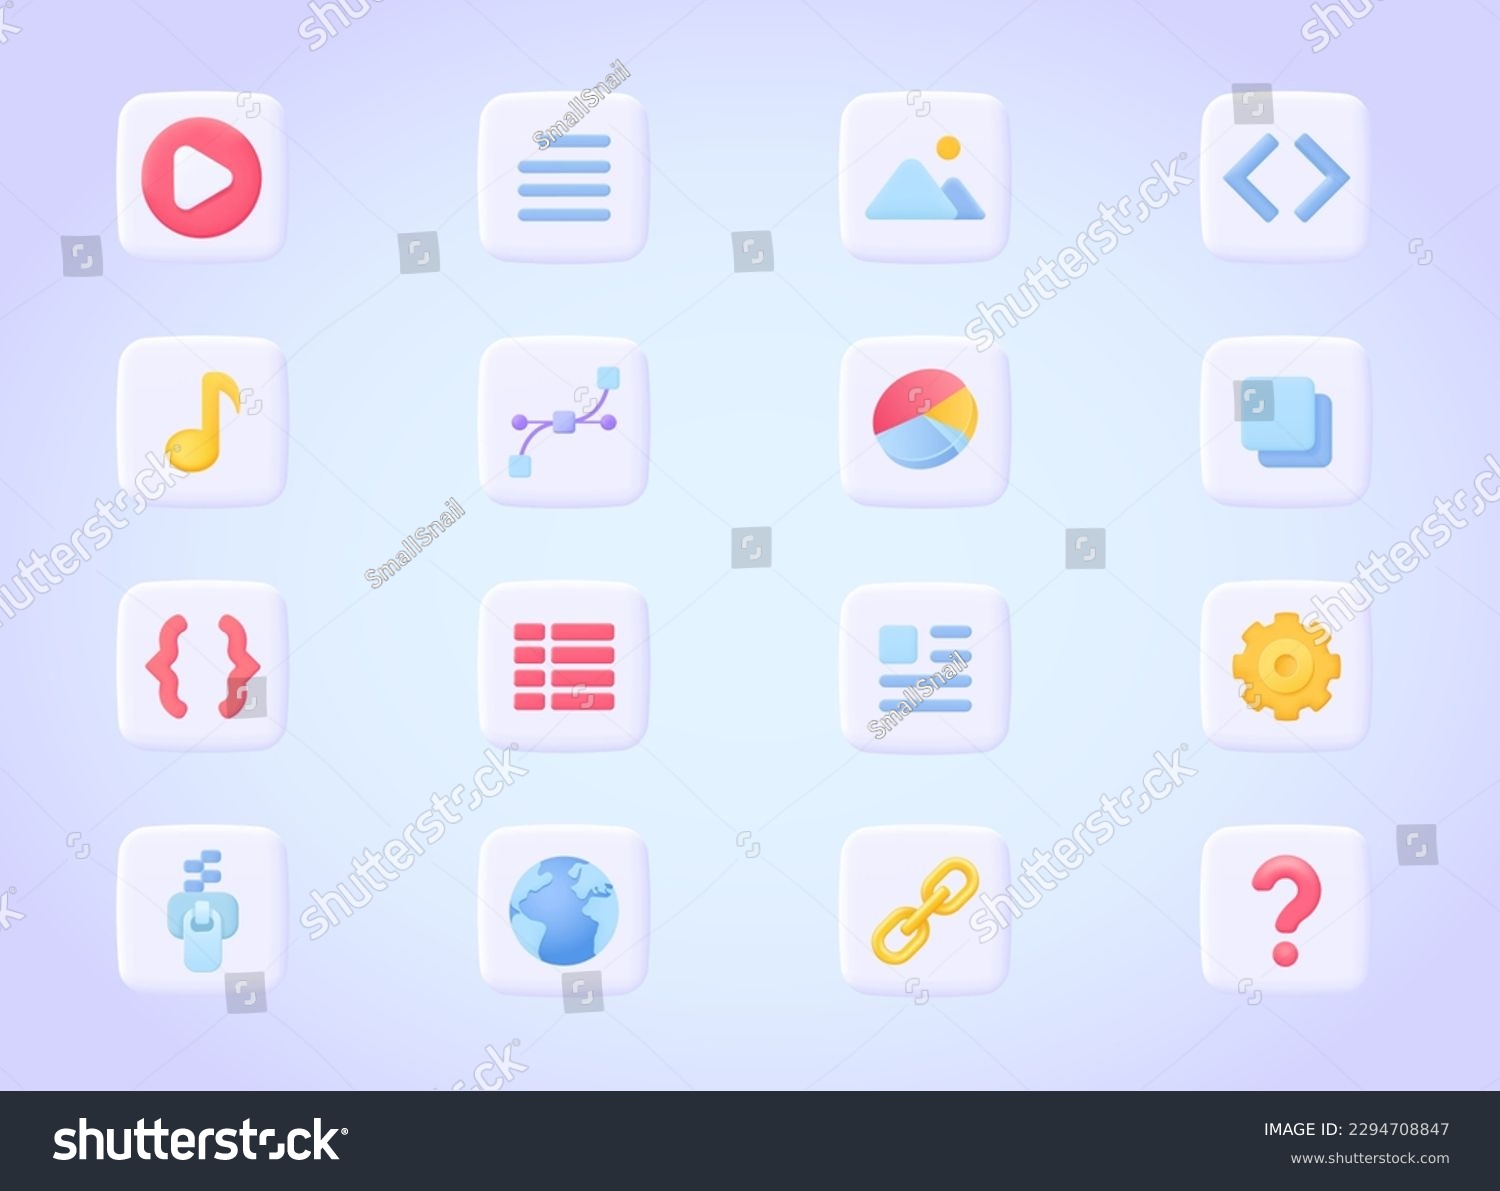 SVG of File type, document format icon set: avi, txt, mp3, png, zip, ai, html, pdf. Large file 3d vector icon collection for mobile or desktop application. Three dimensional vector colourful pictogram set.  svg